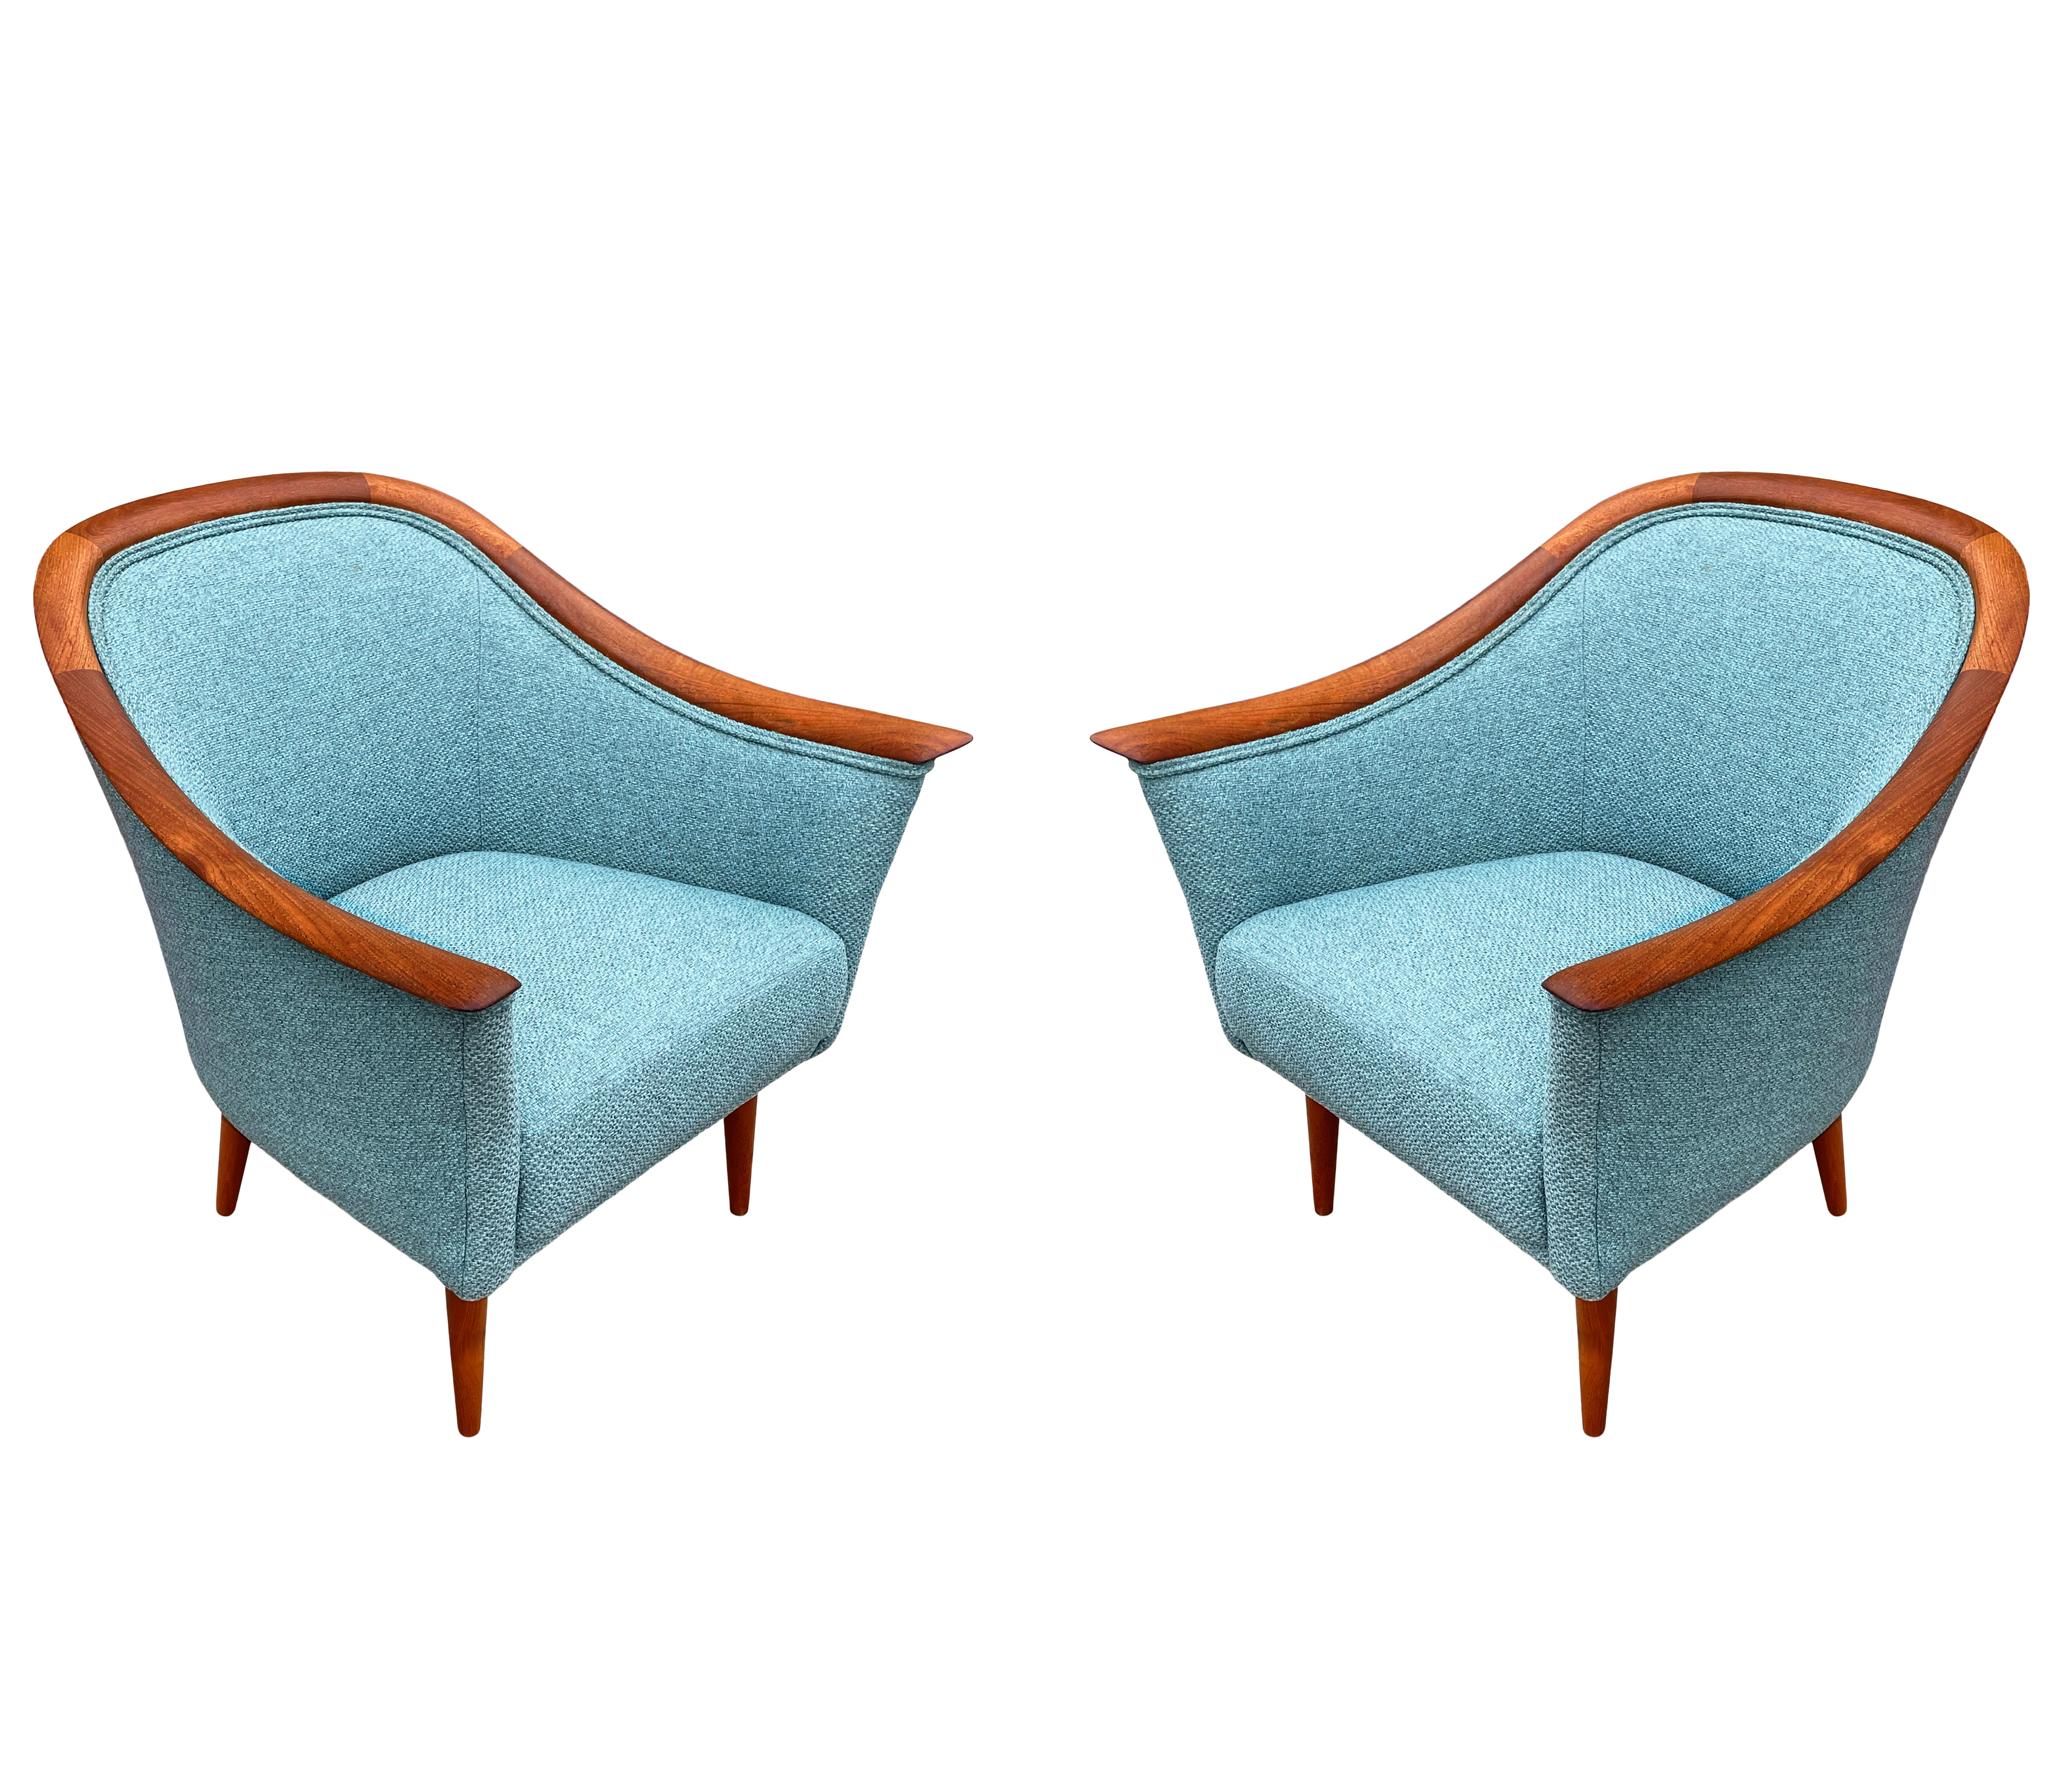 Fabric Matching Pair of Mid Century Danish Modern Lounge Chairs in Teak & Sage Tweed For Sale